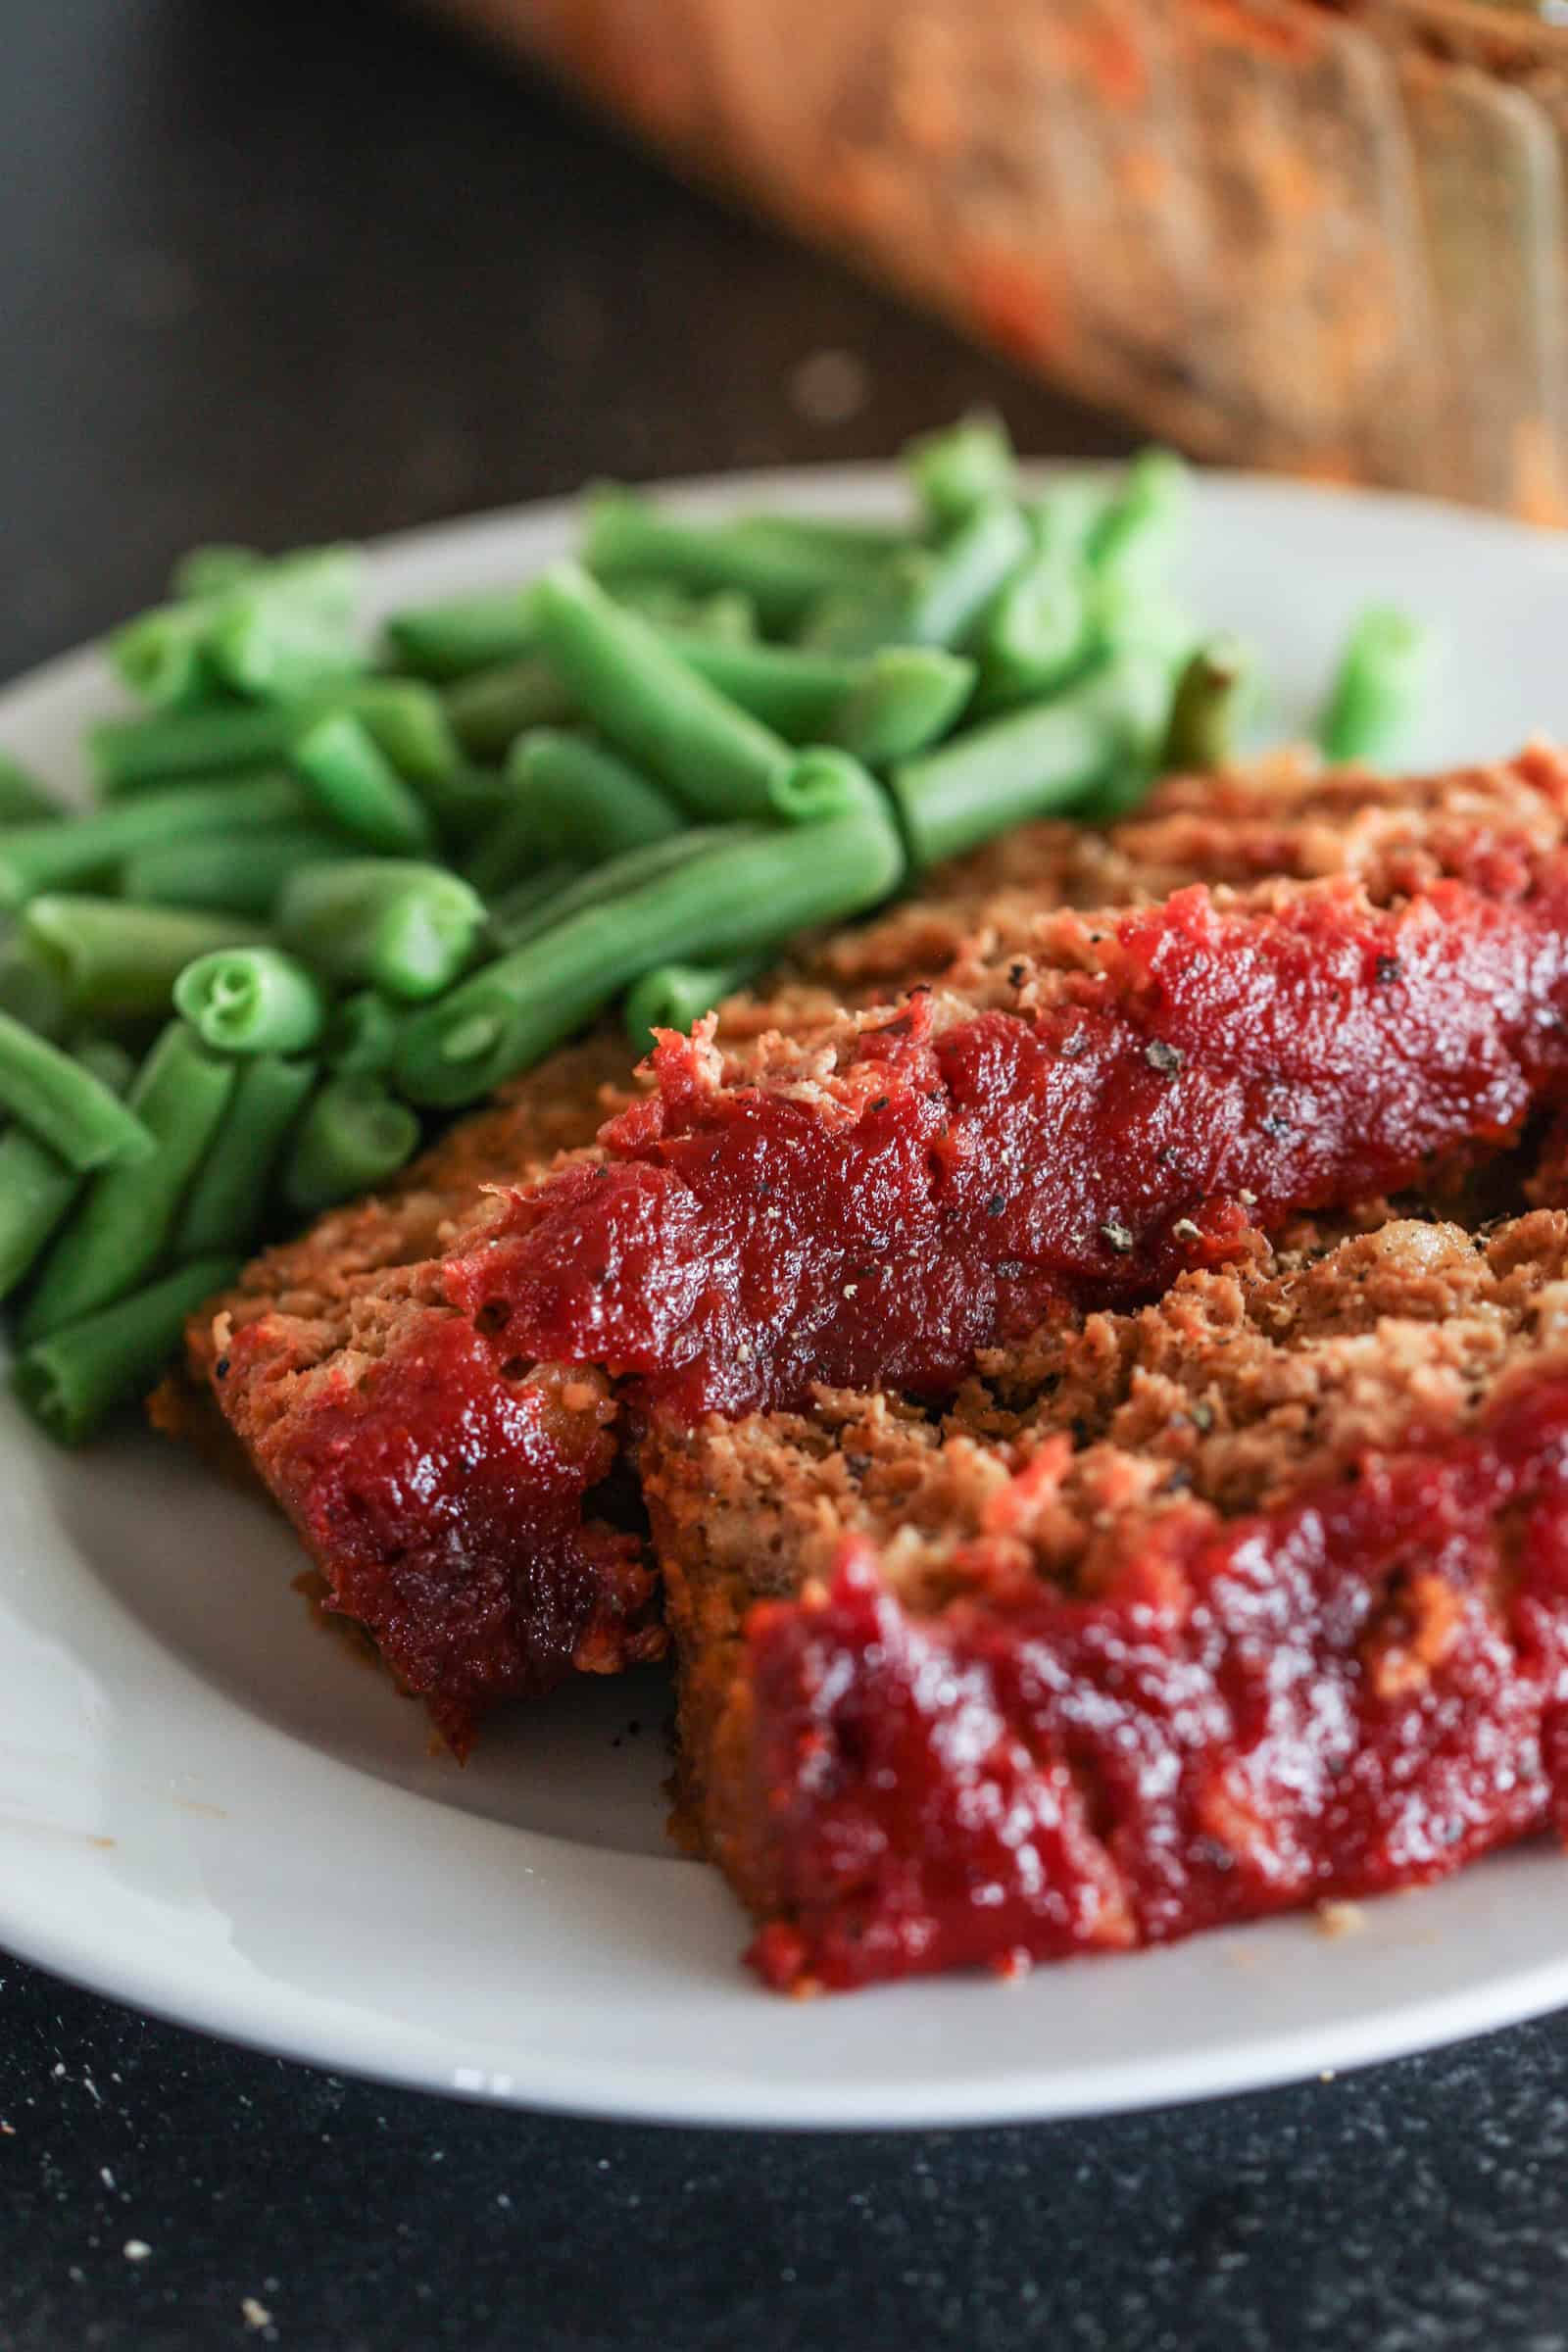 2 Lb Meatloaf Recipe With Oatmeal - Meatloaf Recipe With Oatmeal The ...